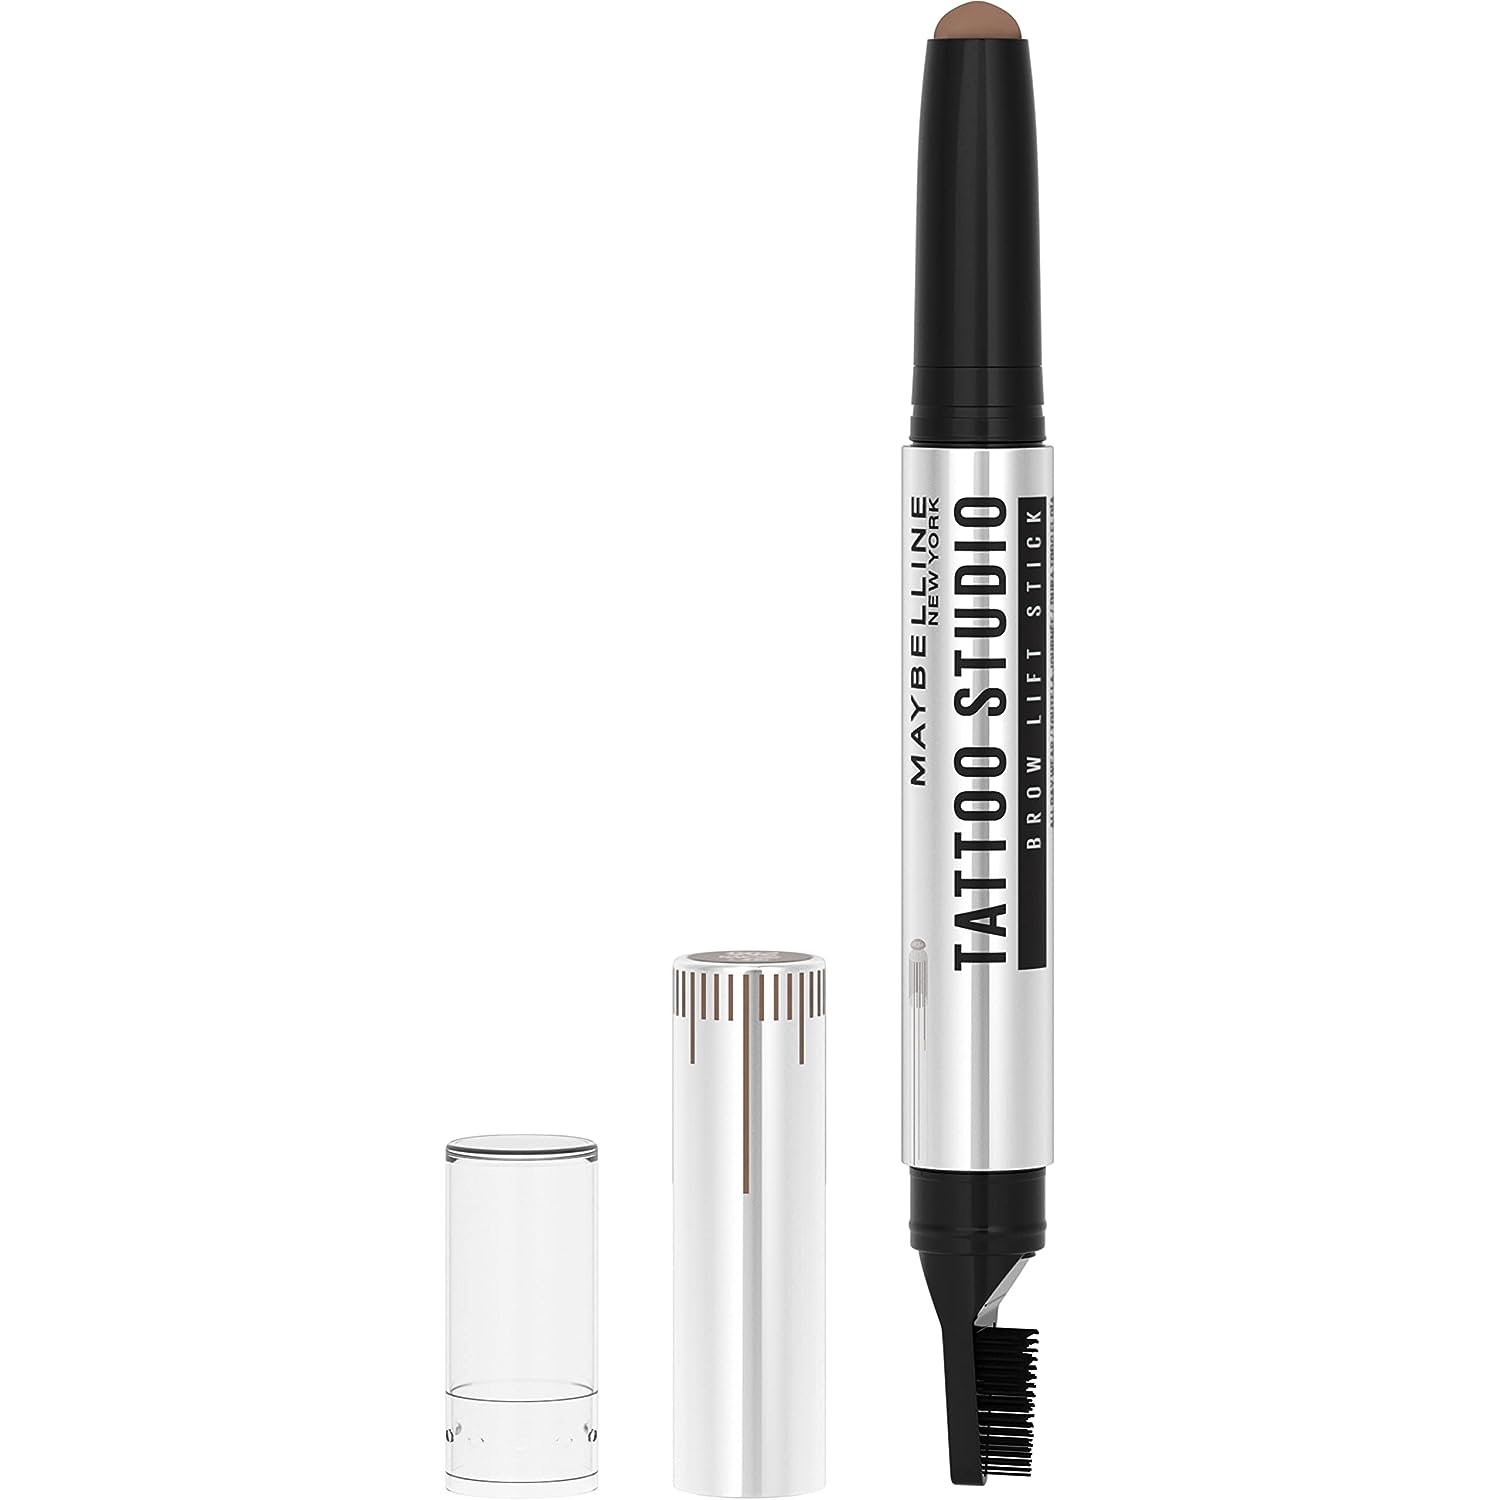 Maybelline New York TattooStudio Brow Lift Stick Makeup with Tinted Wax Conditioning Complex, Soft Brown, 1 Count